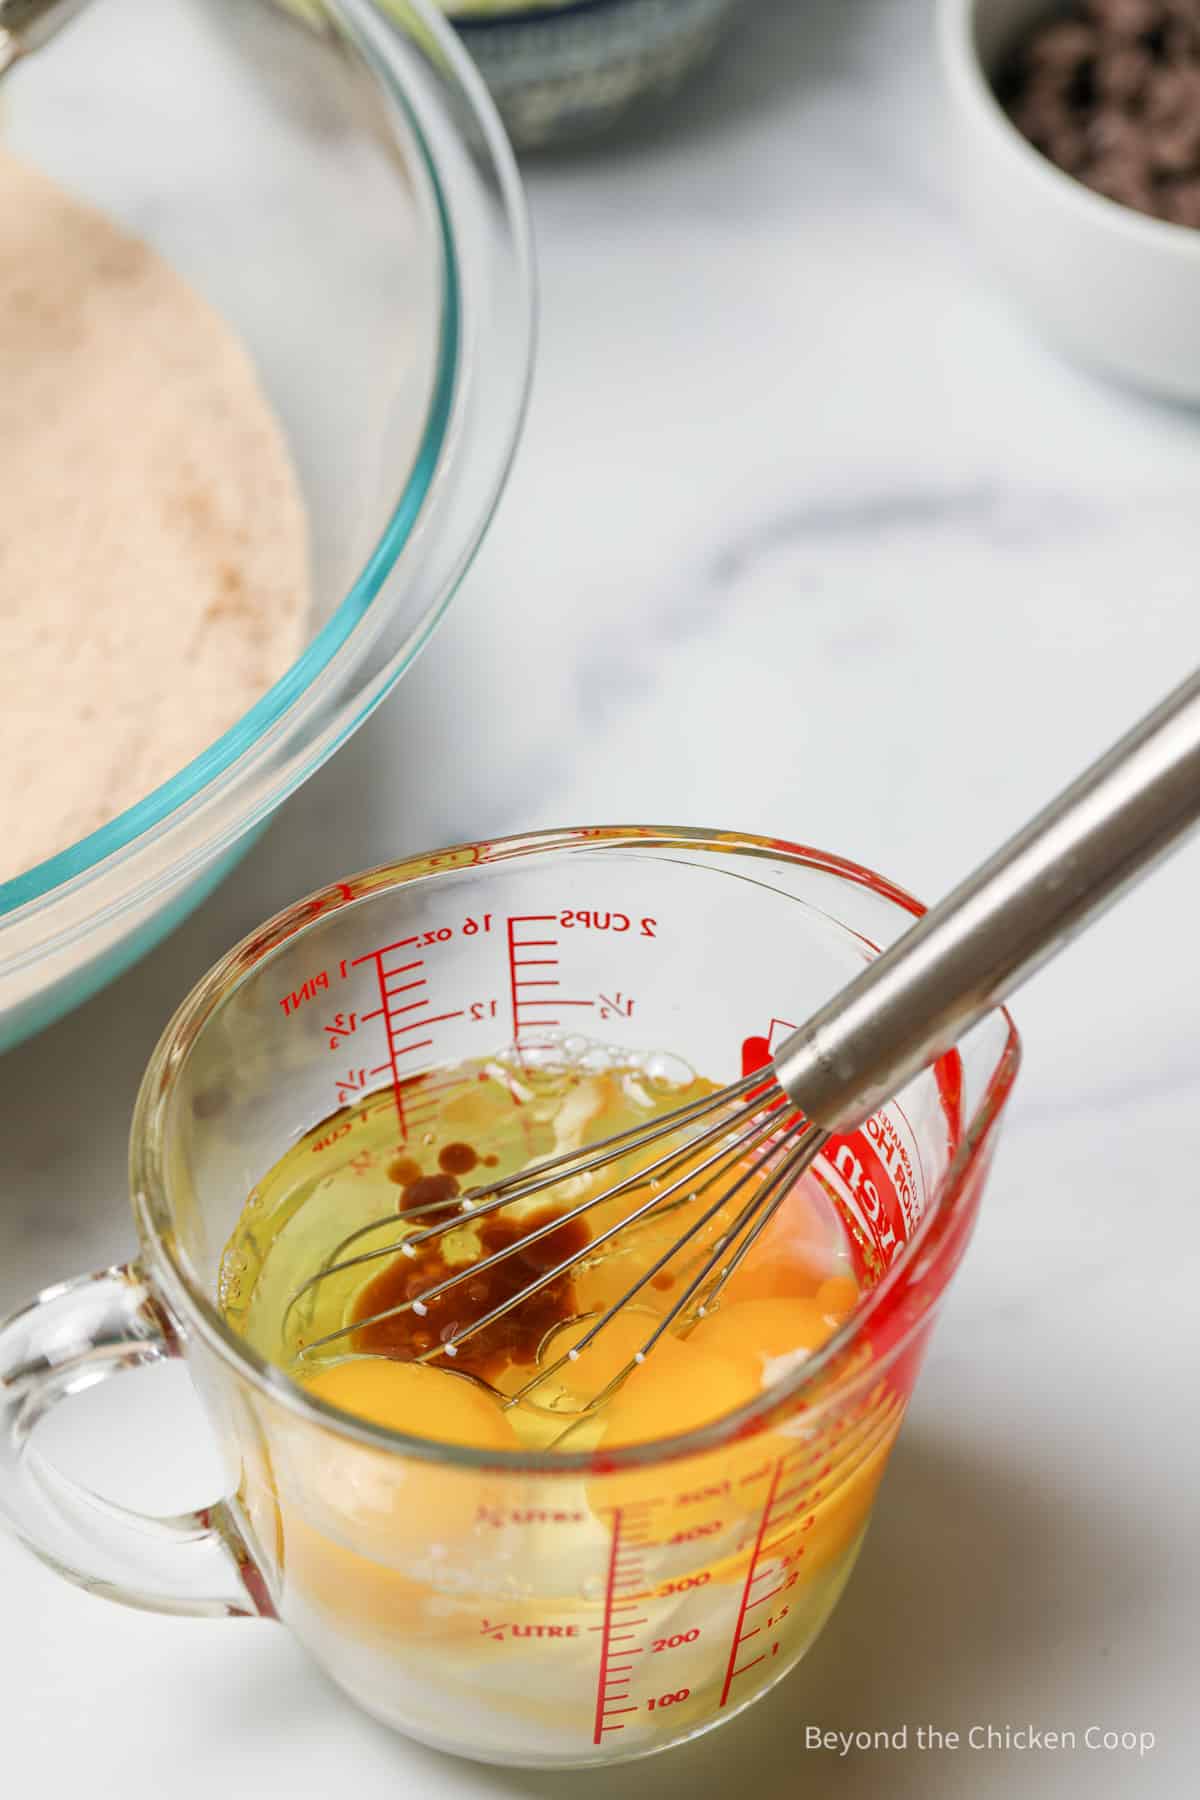 Mixing eggs, sour cream and oil together in a glass measuring cup.